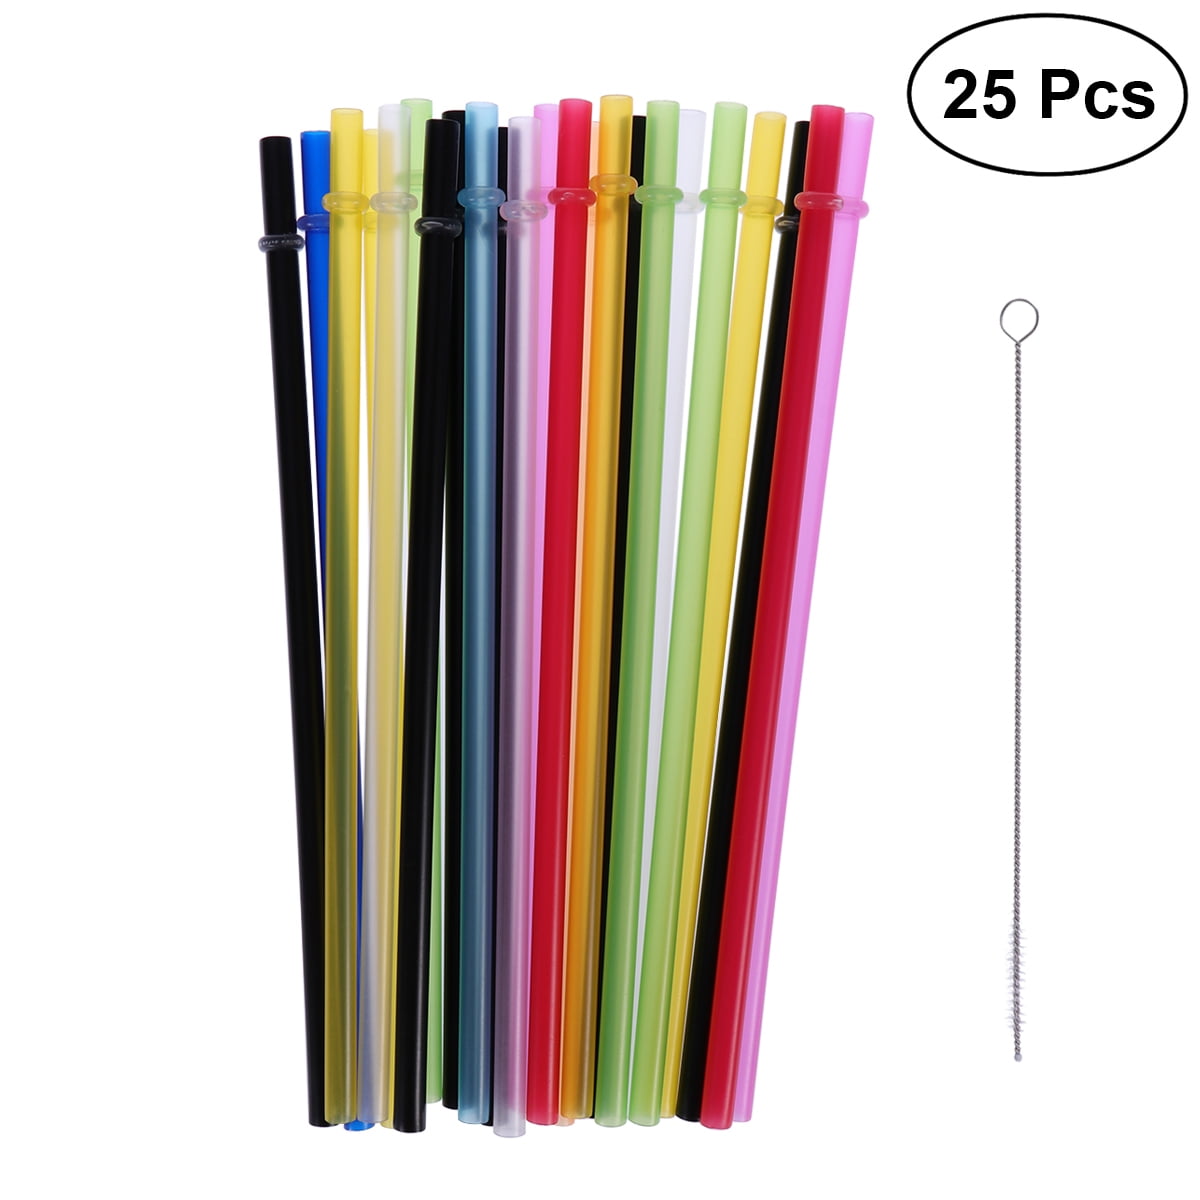 25-Pack Hard Plastic Reusable Straws with Cleaning Brush, Long Thick Unbreakable Straws for Tumblers, Mason Jar, Yeti, Tervis